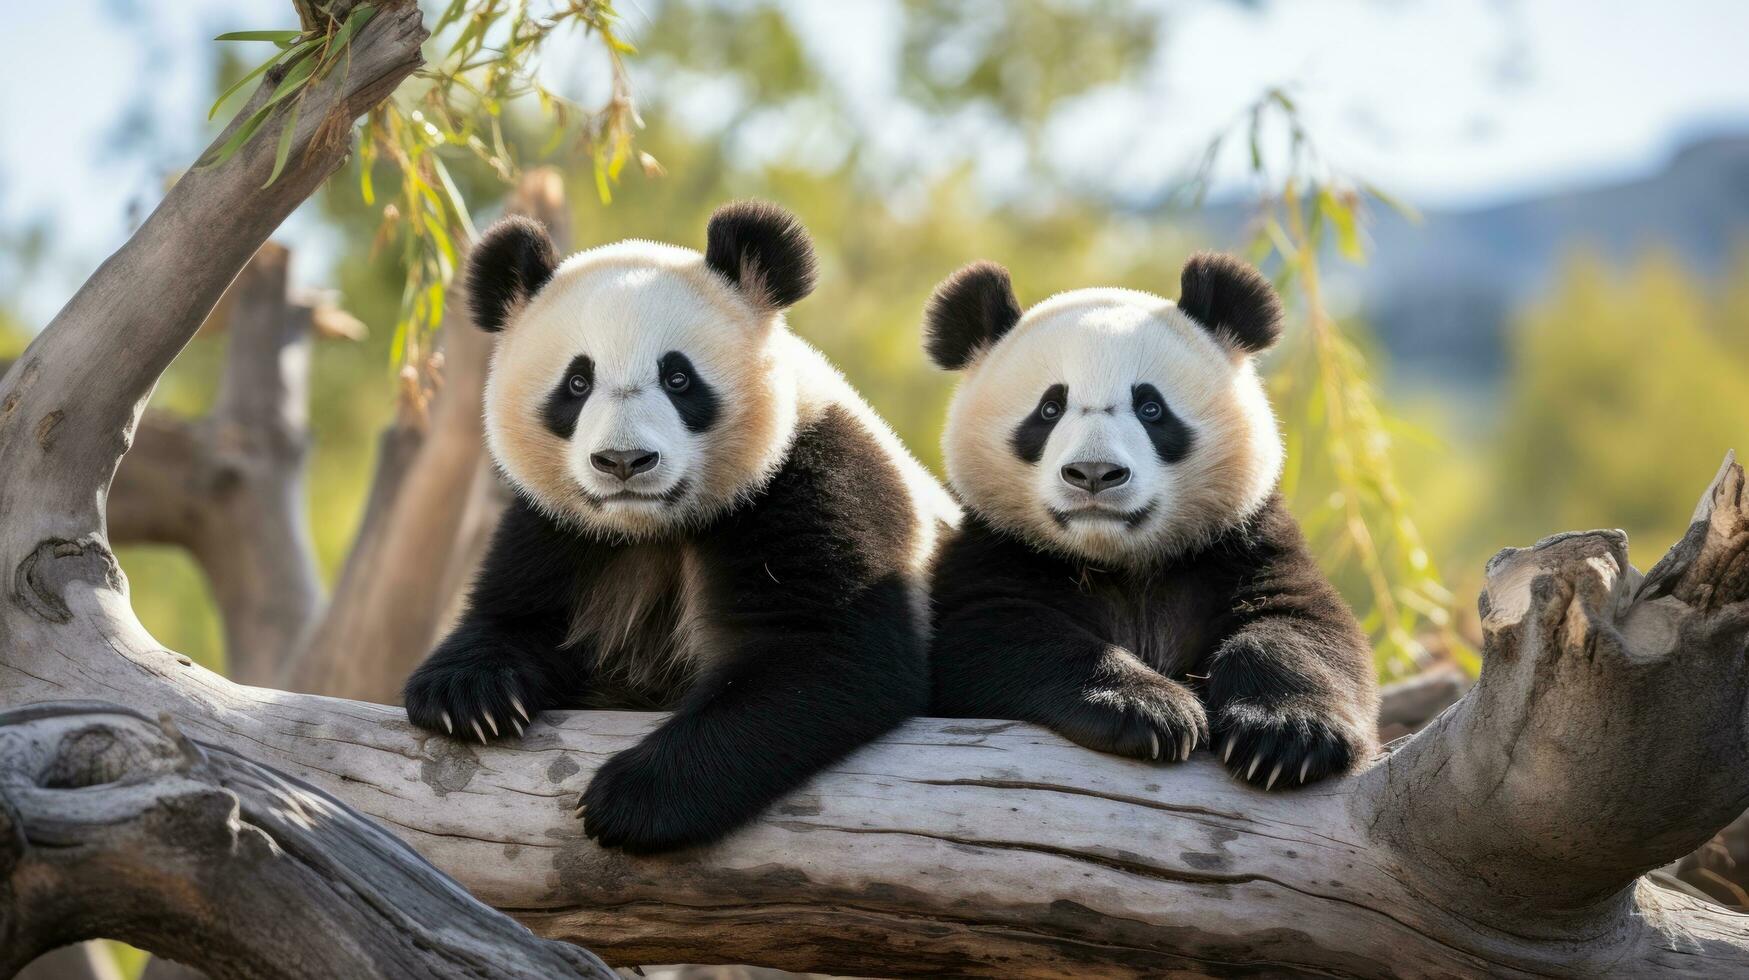 Two pandas sitting together looking content and relaxed photo